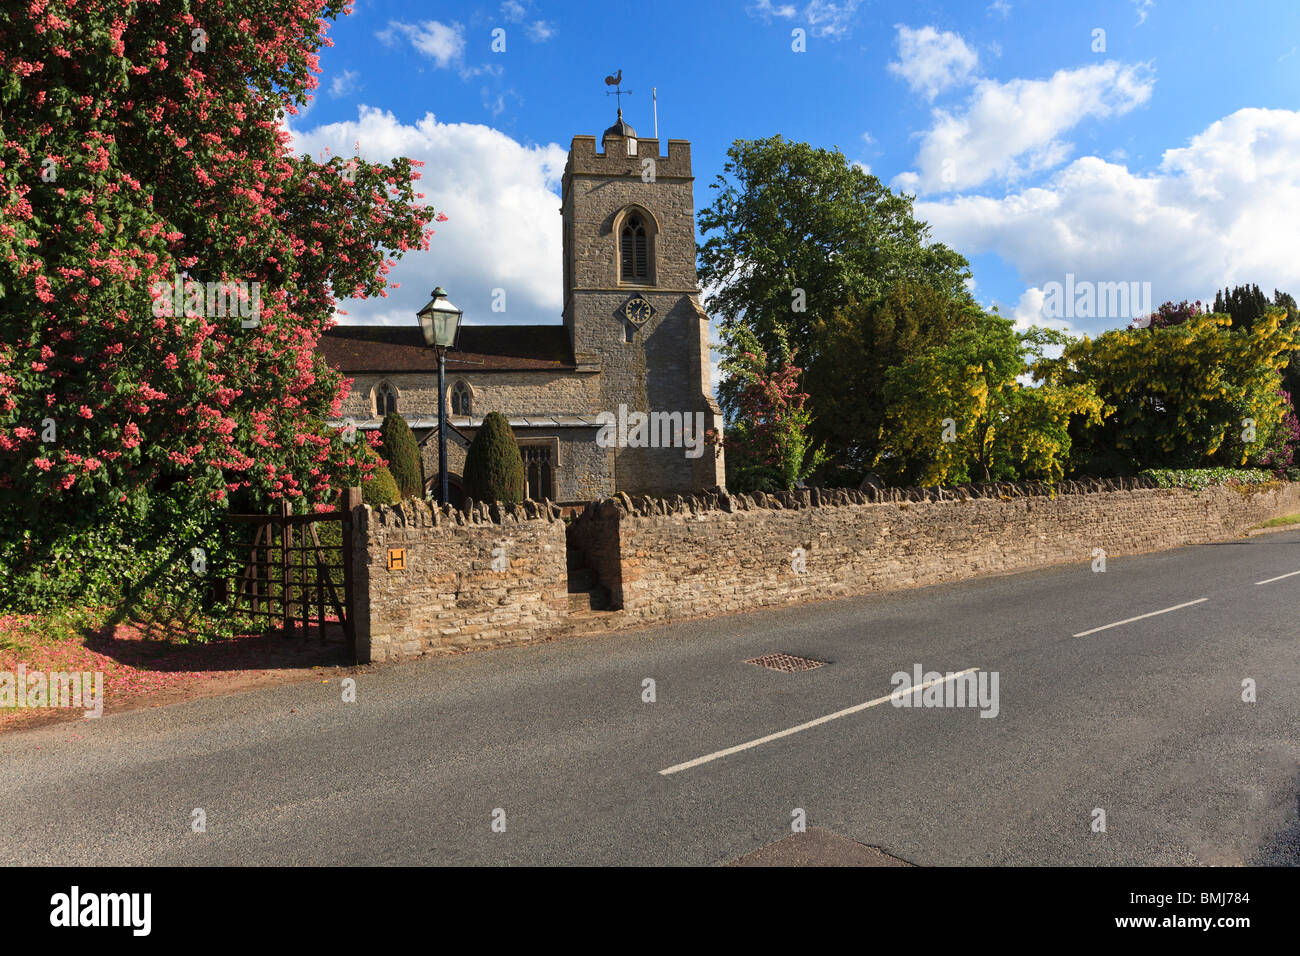 The attractive church of St Laurence, in the desirable village of Weston Underwood, Buckinghamshire, UK Stock Photo